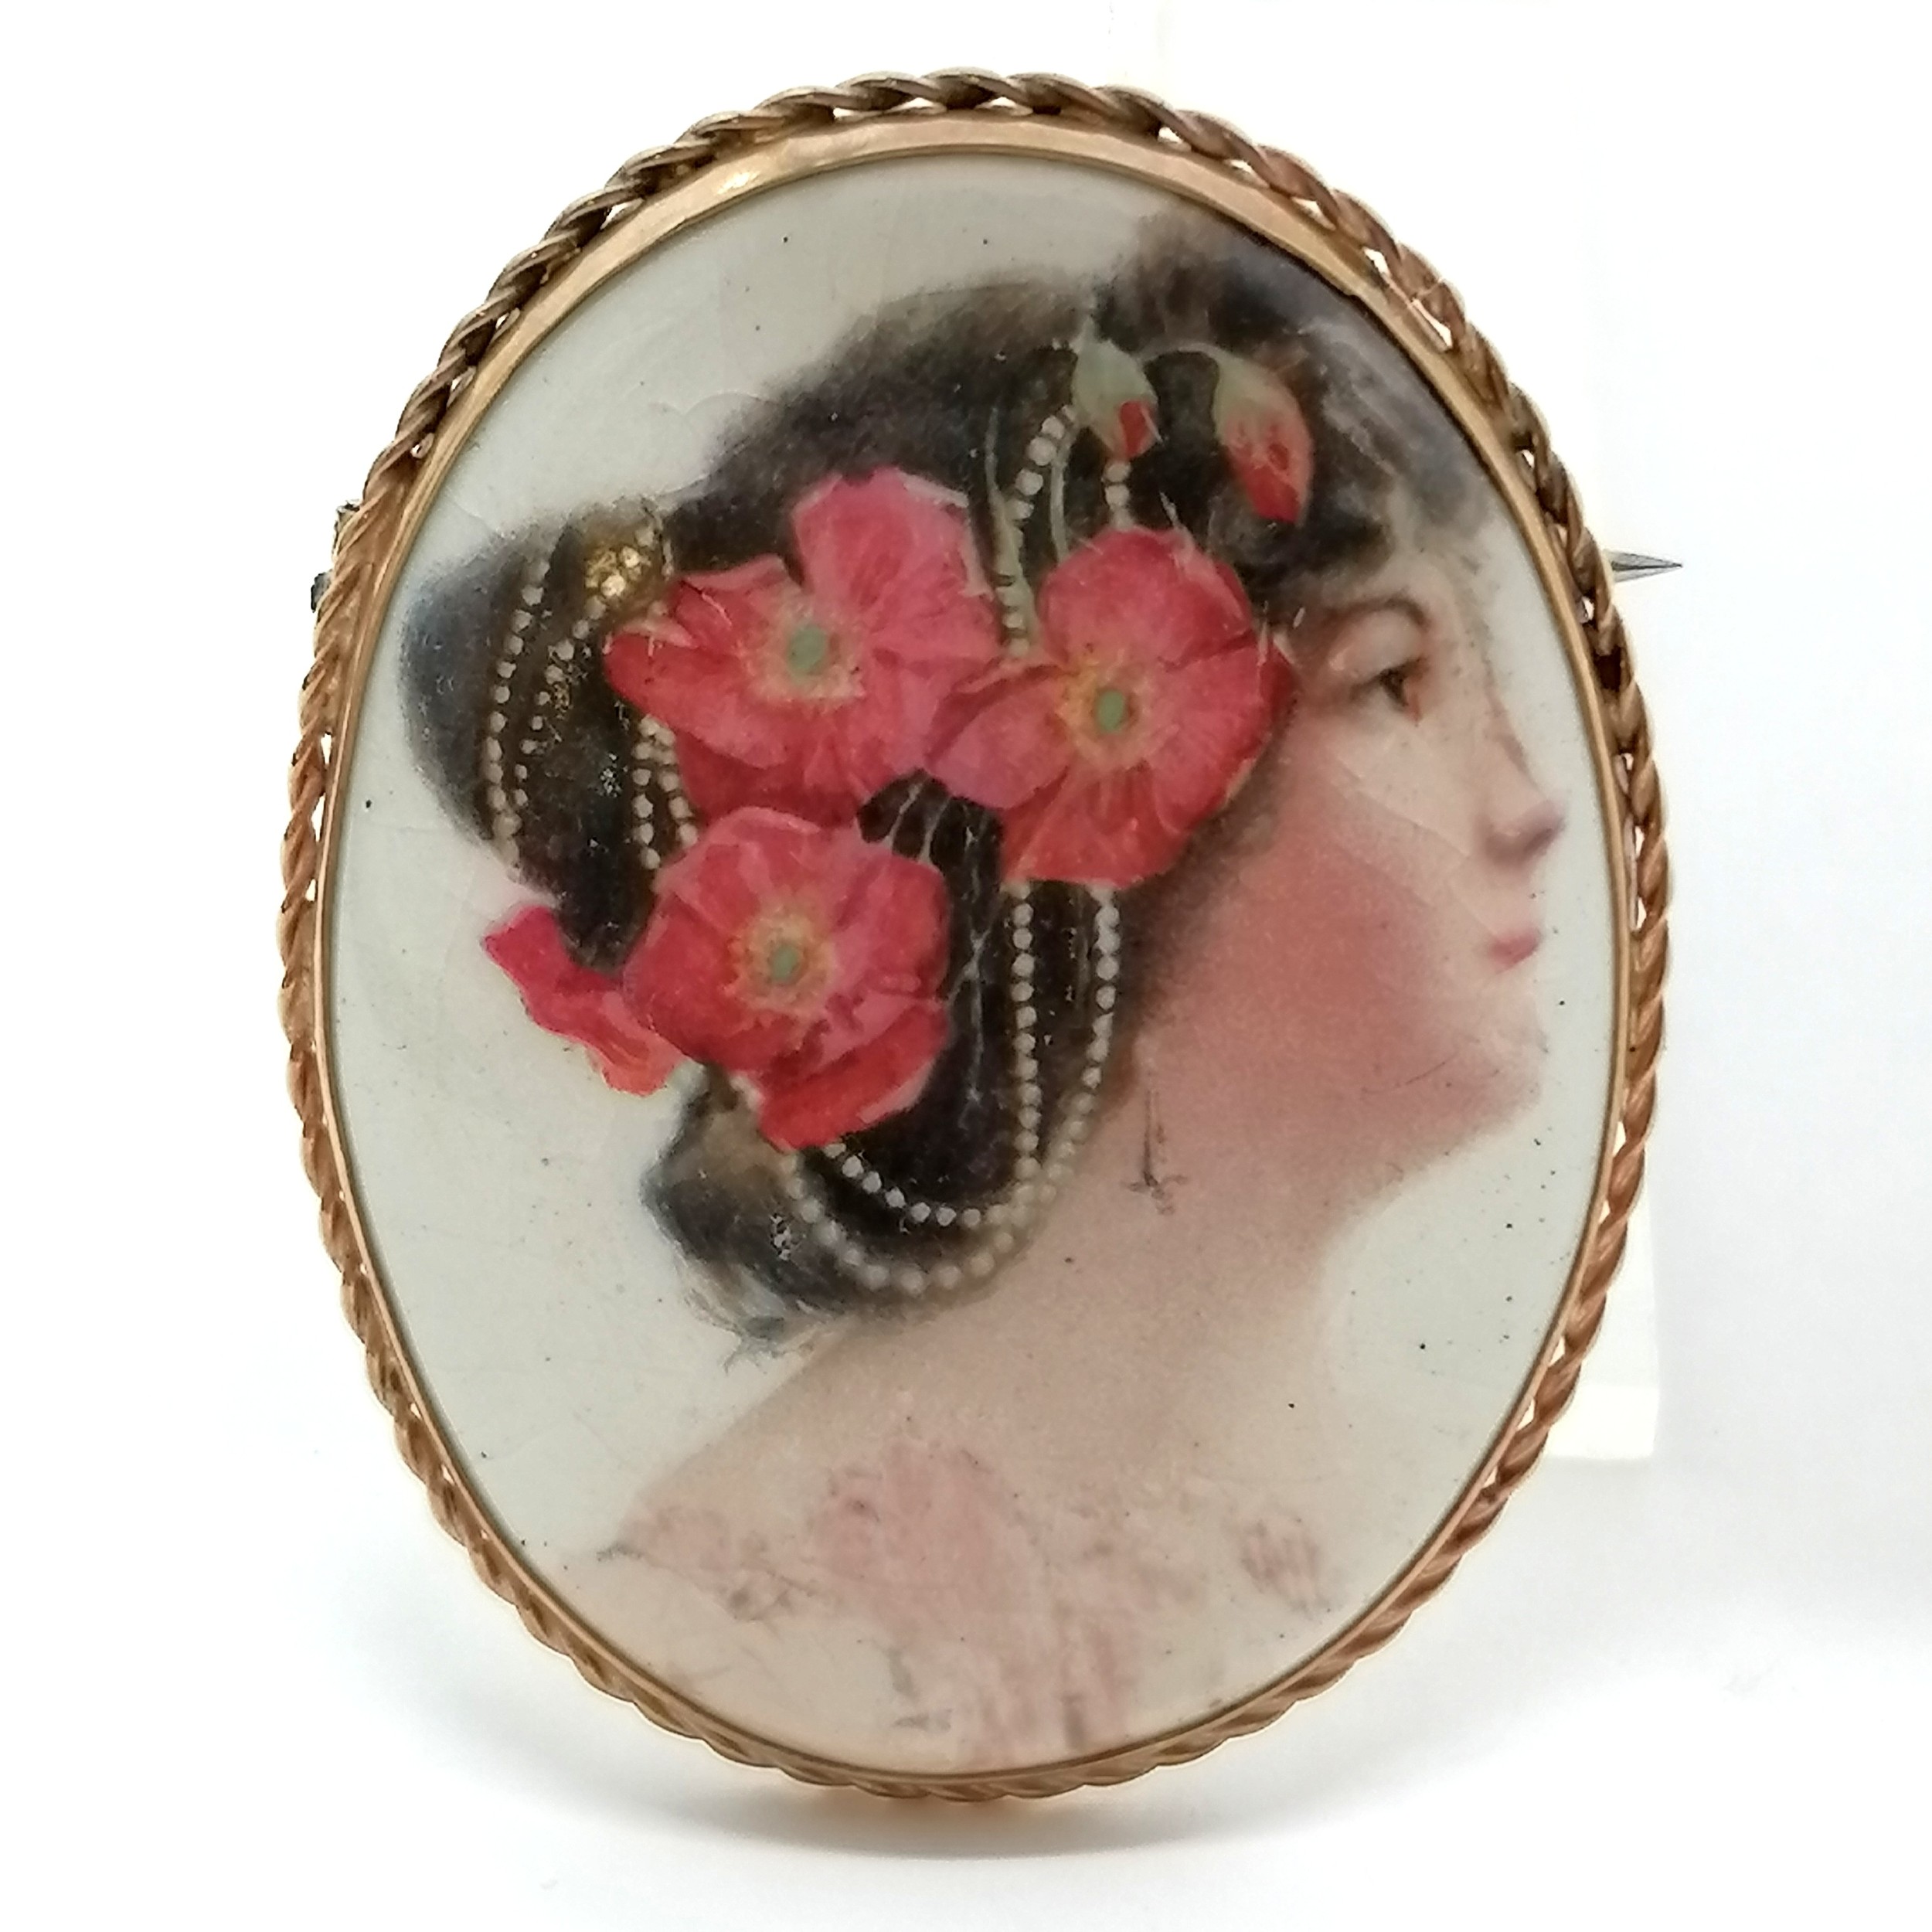 9ct marked gold mounted porcelain panel brooch of lady with flowers in her hair - 5cm drop & 17g